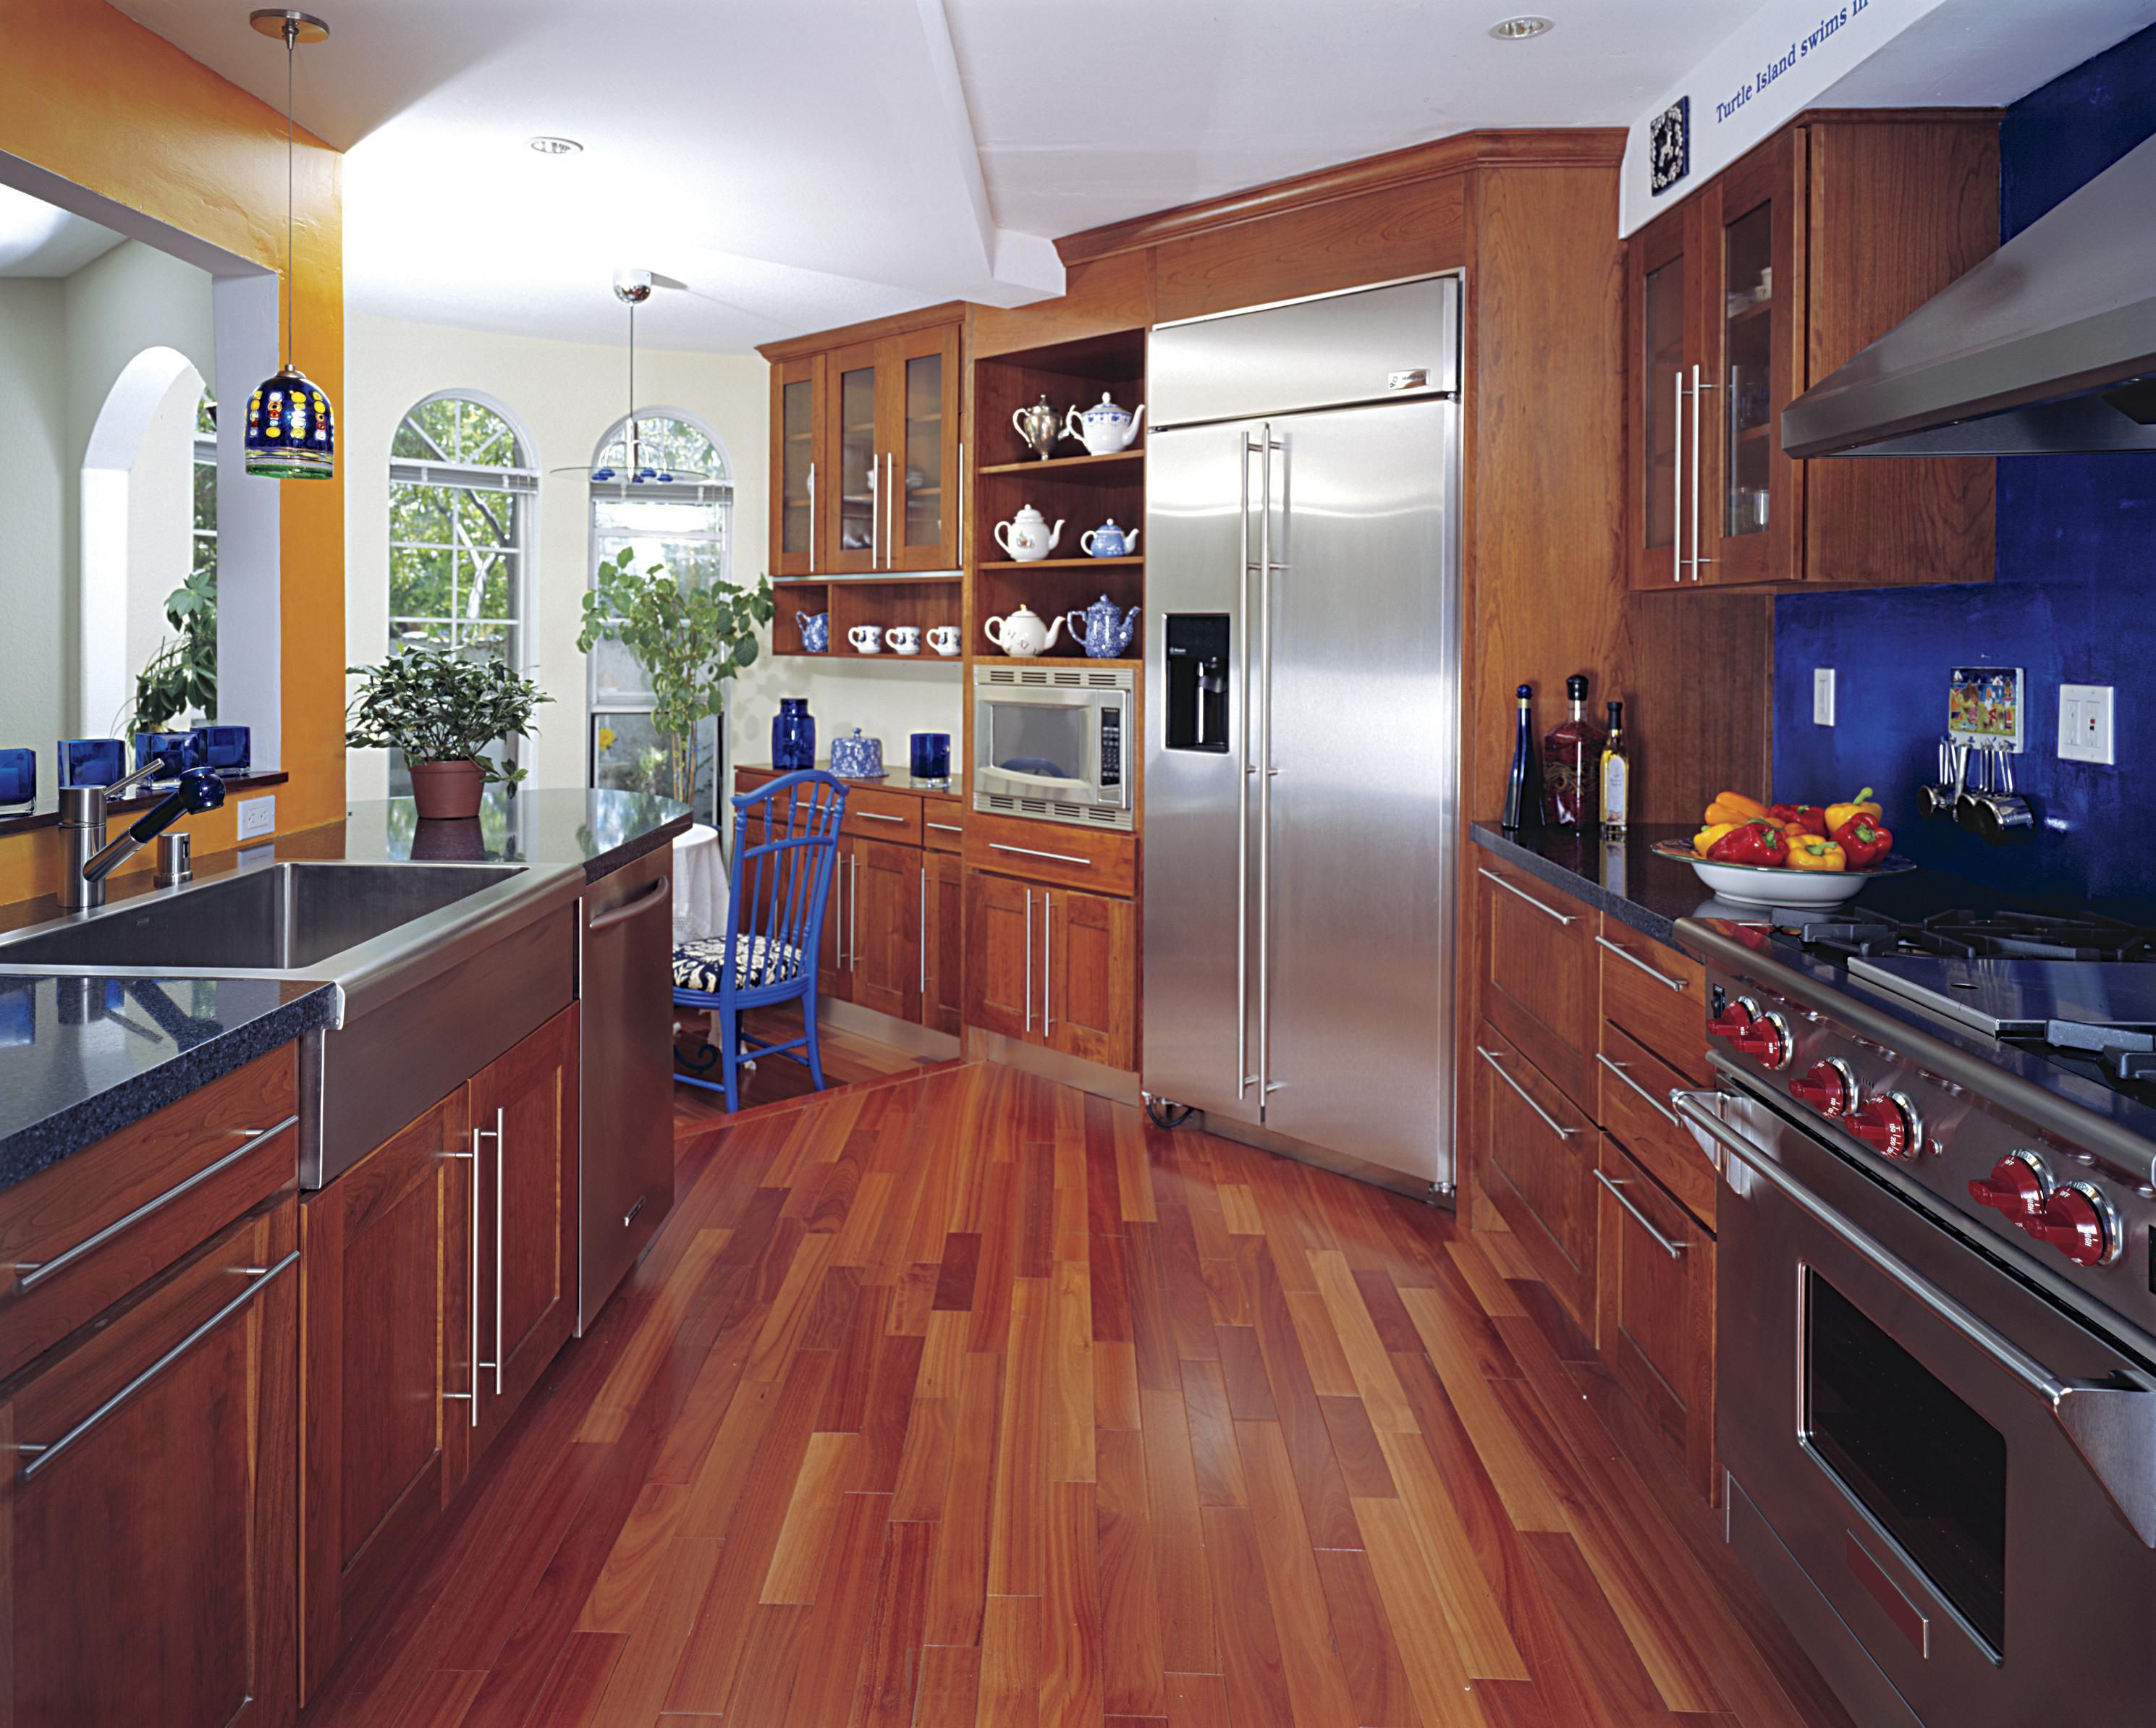 19 Stylish Laminate Hardwood Floor Scratch Repair 2024 free download laminate hardwood floor scratch repair of hardwood floor in a kitchen is this allowed throughout 186828472 56a49f3a5f9b58b7d0d7e142